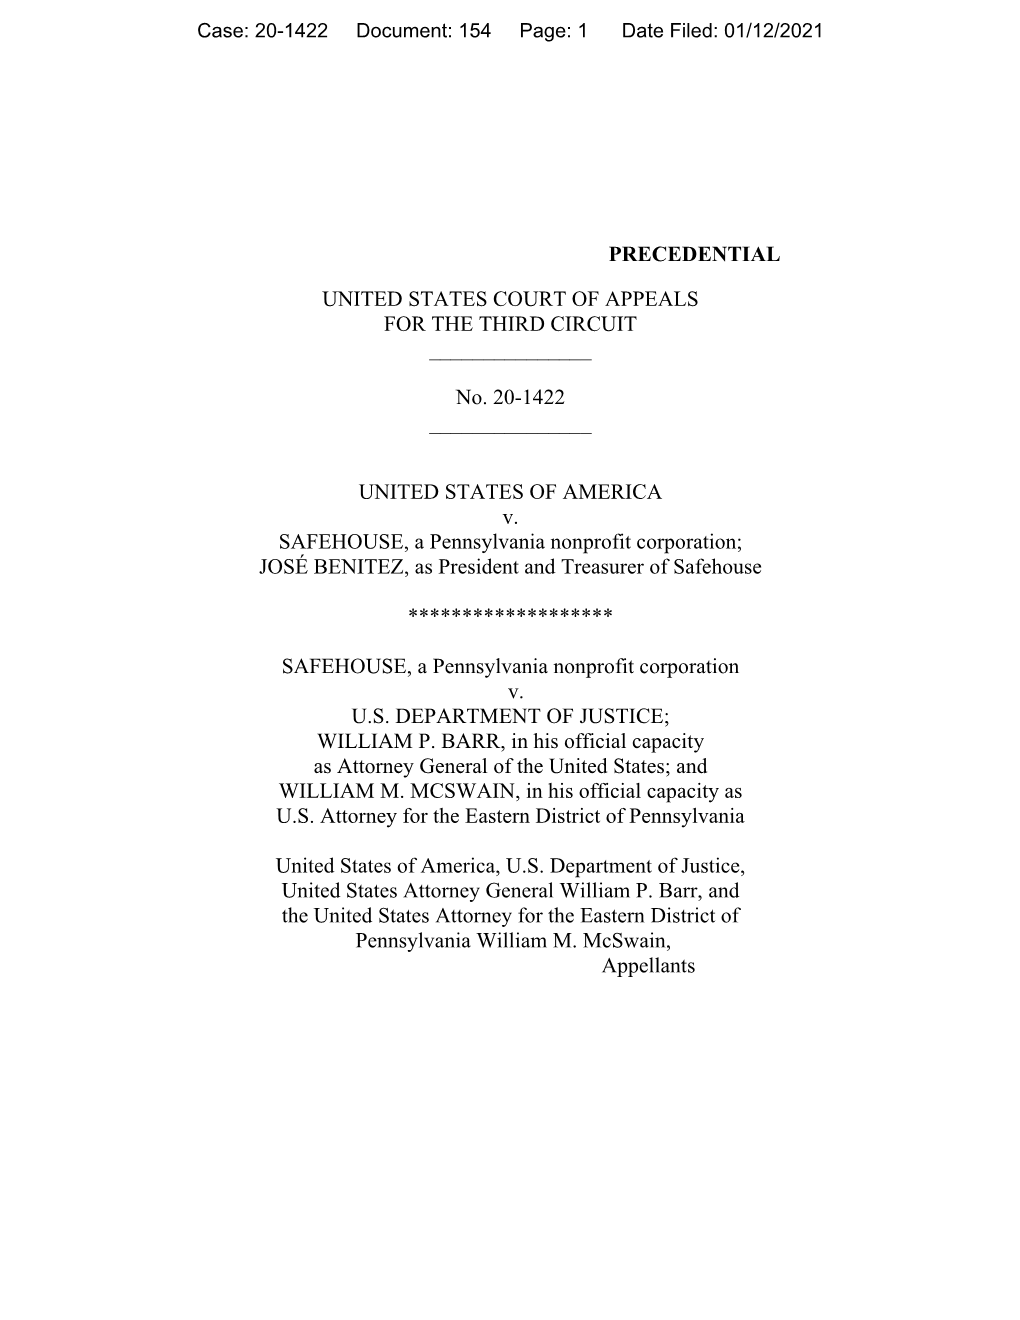 PRECEDENTIAL UNITED STATES COURT of APPEALS for the THIRD CIRCUIT No. 20-1422